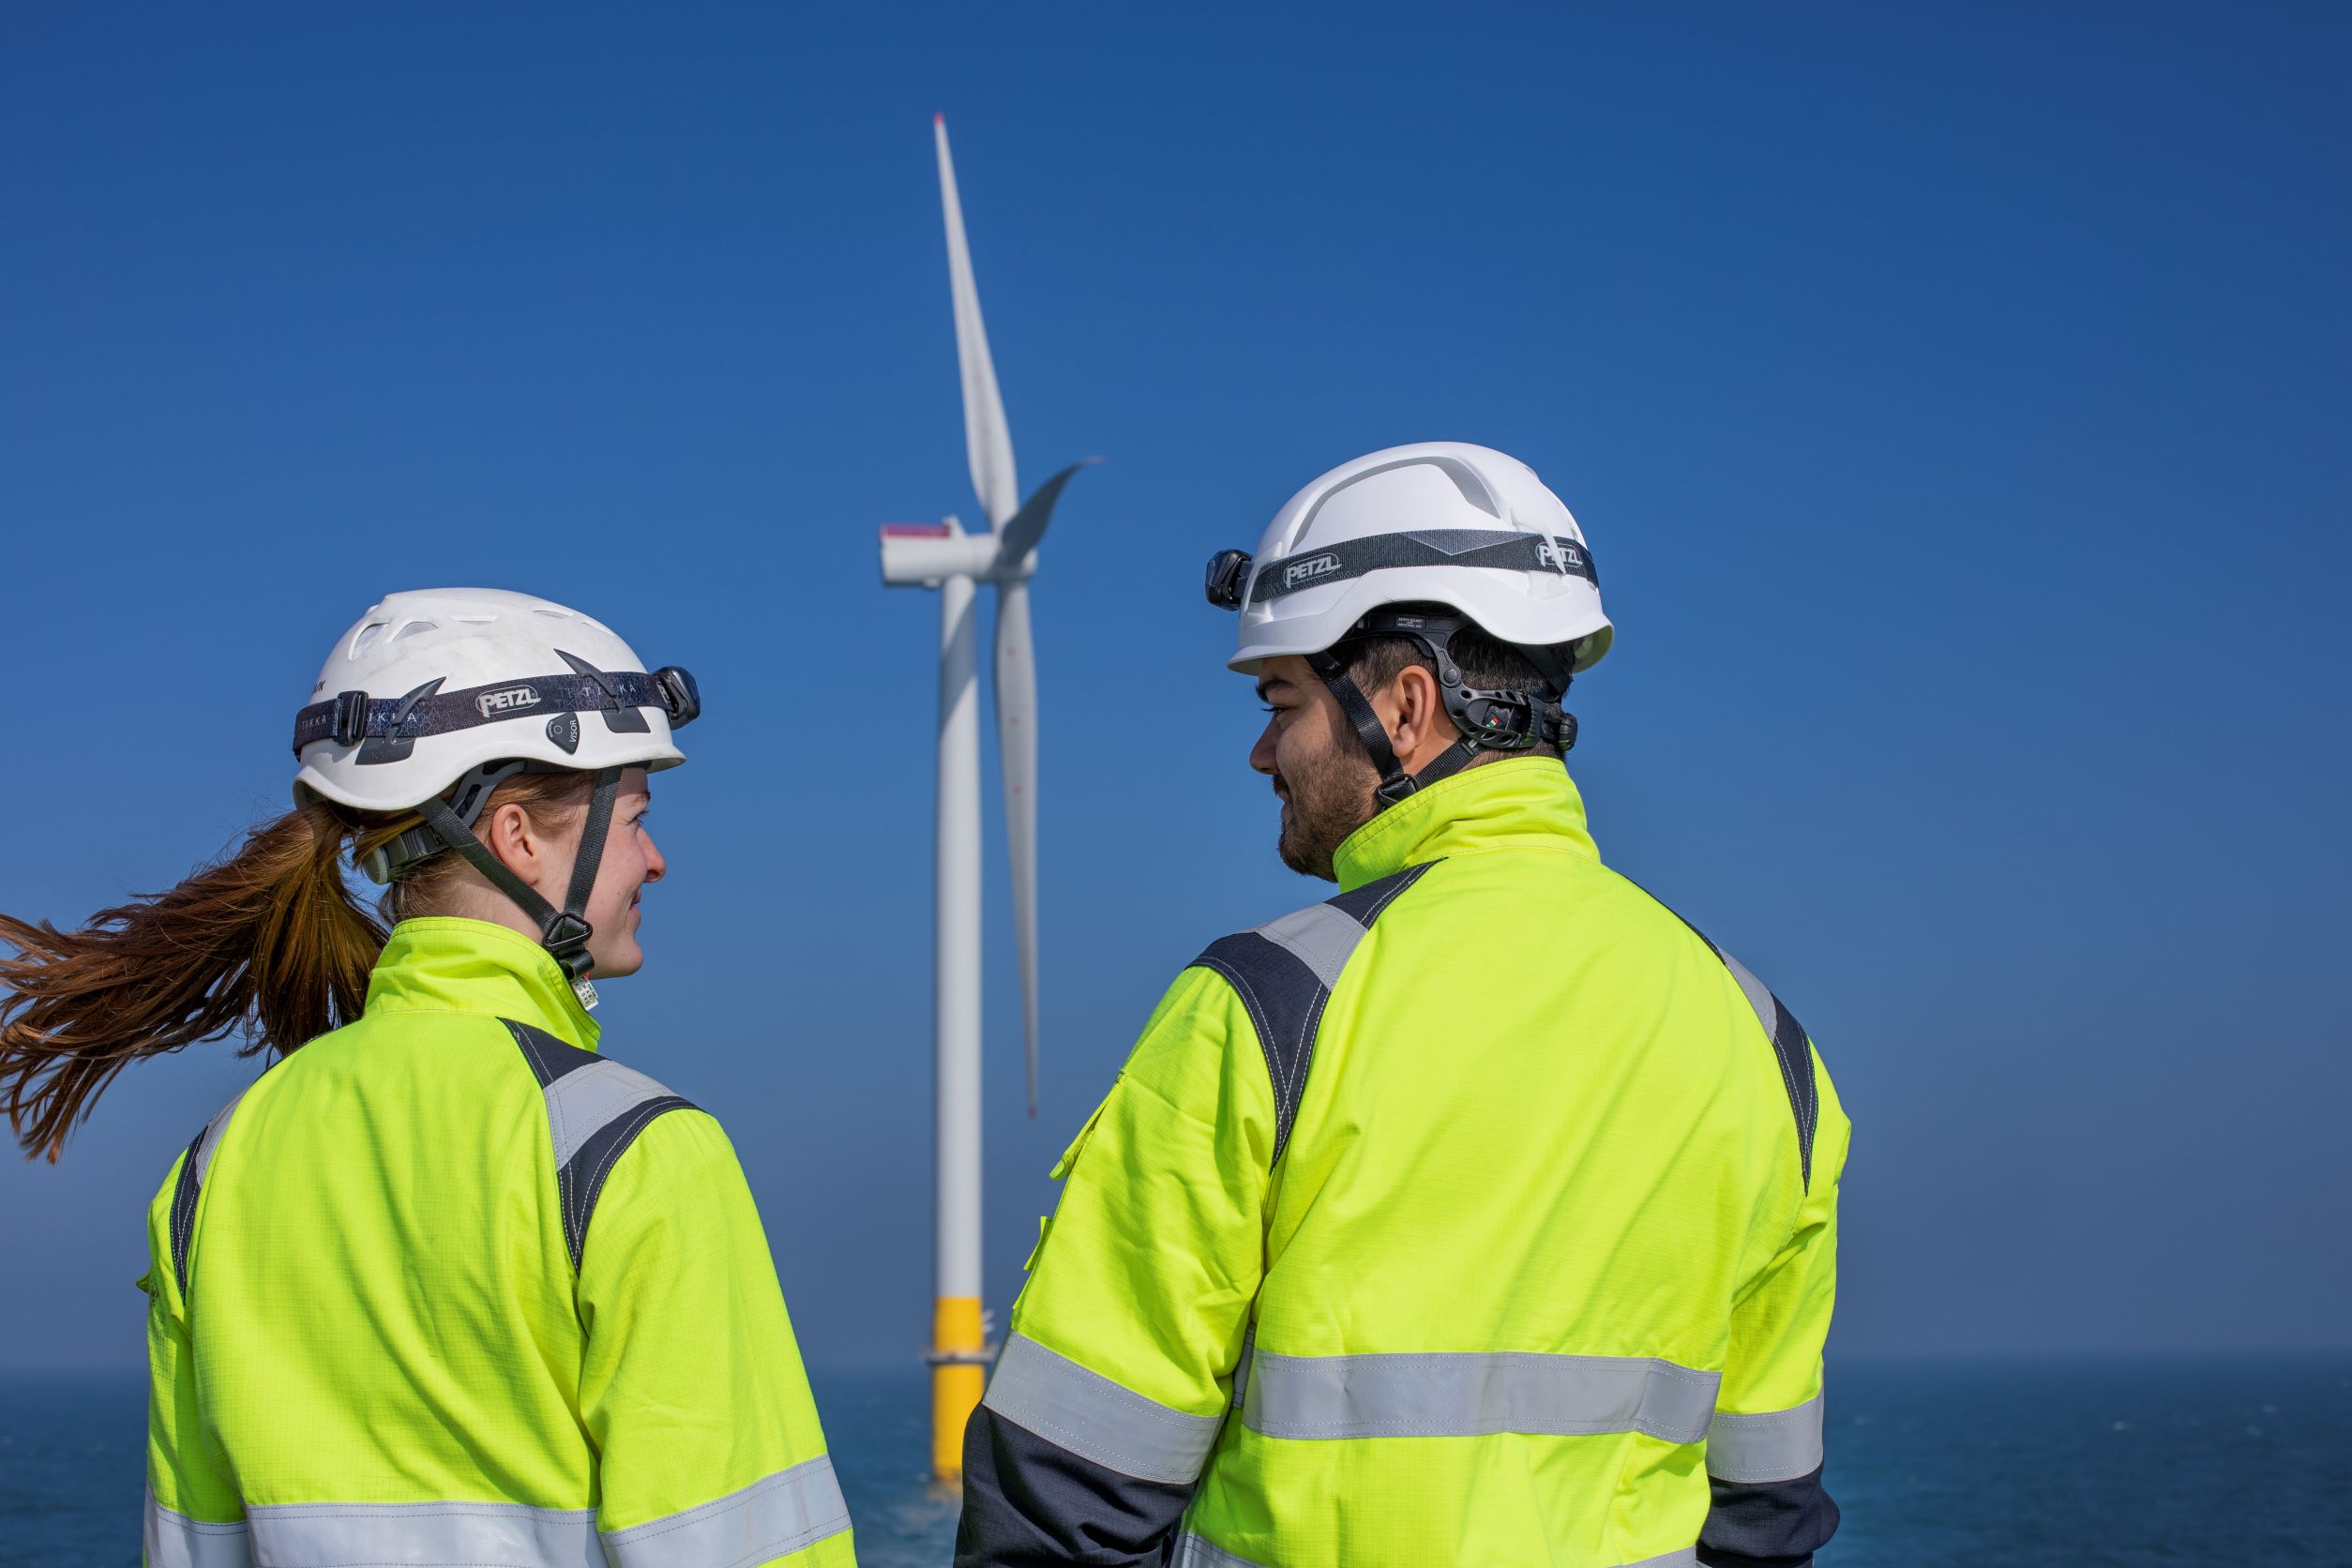 MEMBER NEWS: Orsted and 3t Training Services team up to get more women into the wind industry